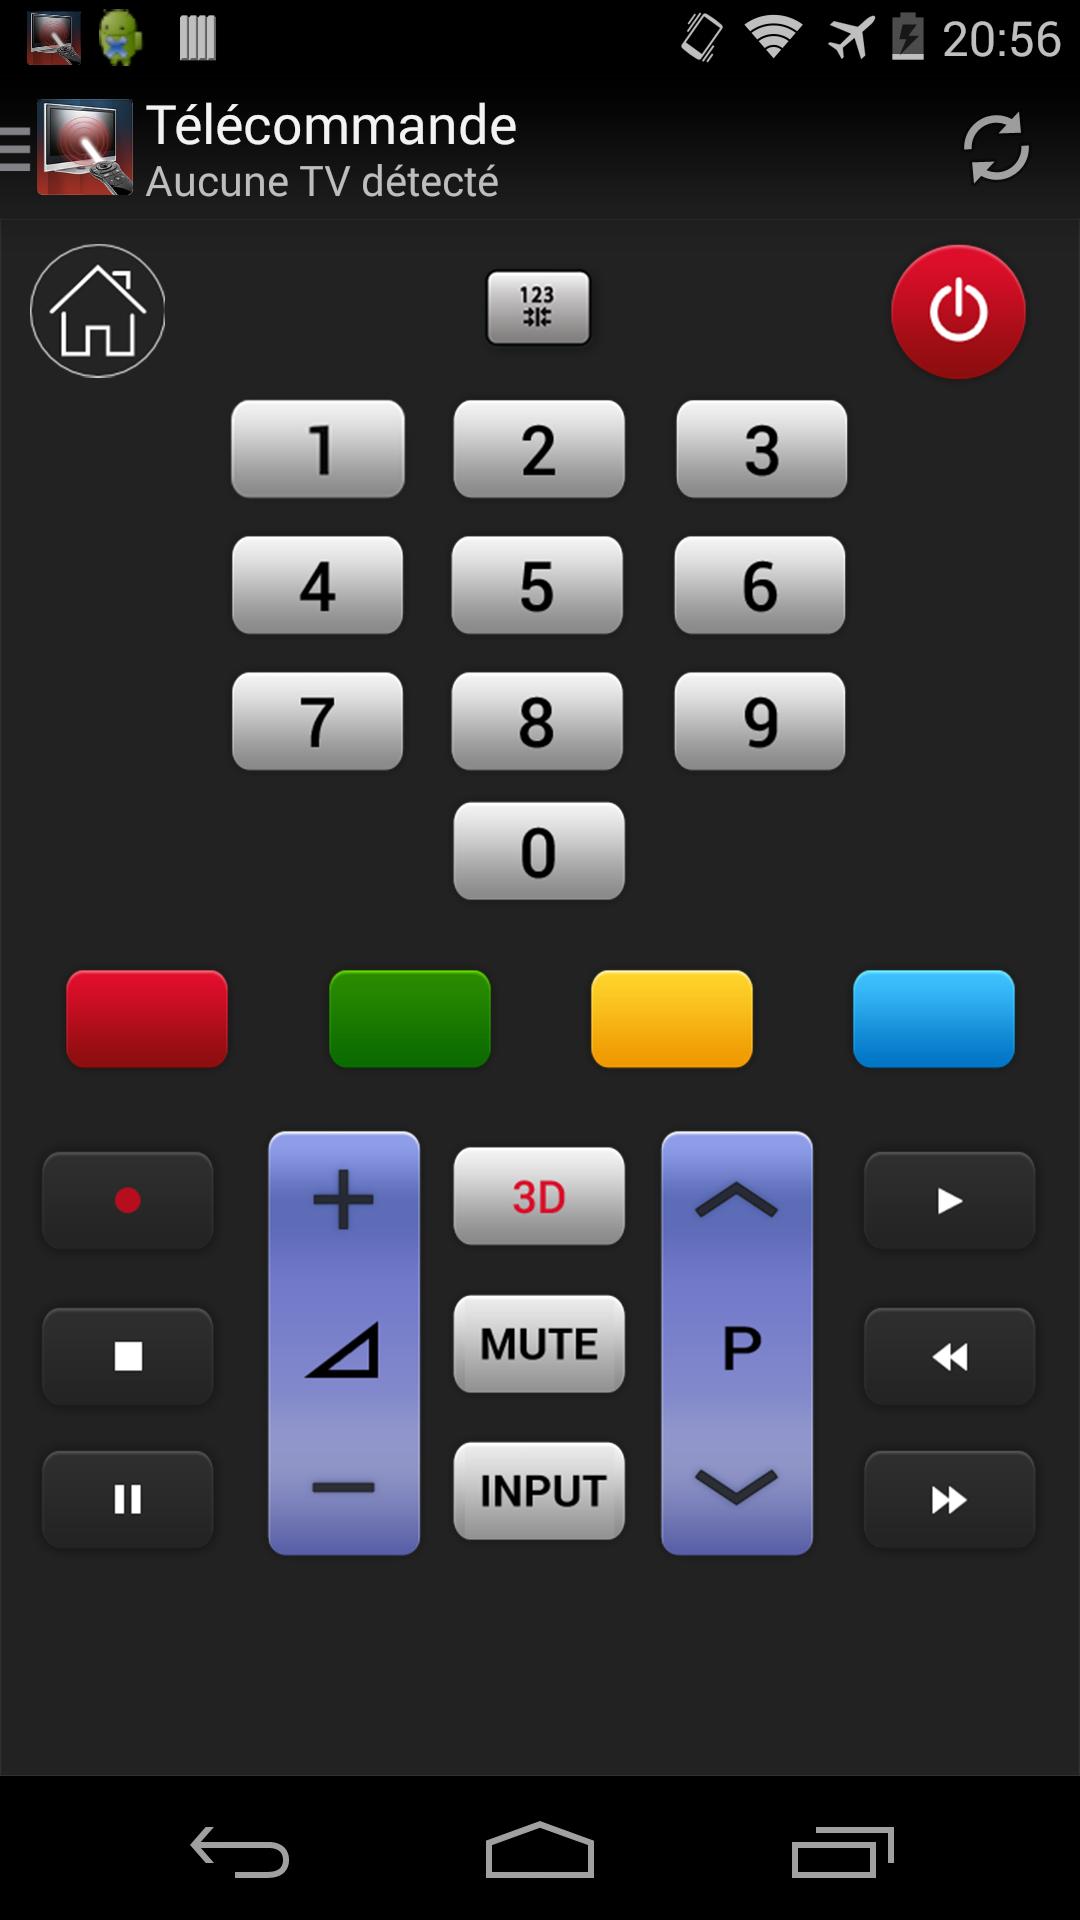 Control Remoto para TV LG for Android - APK Download